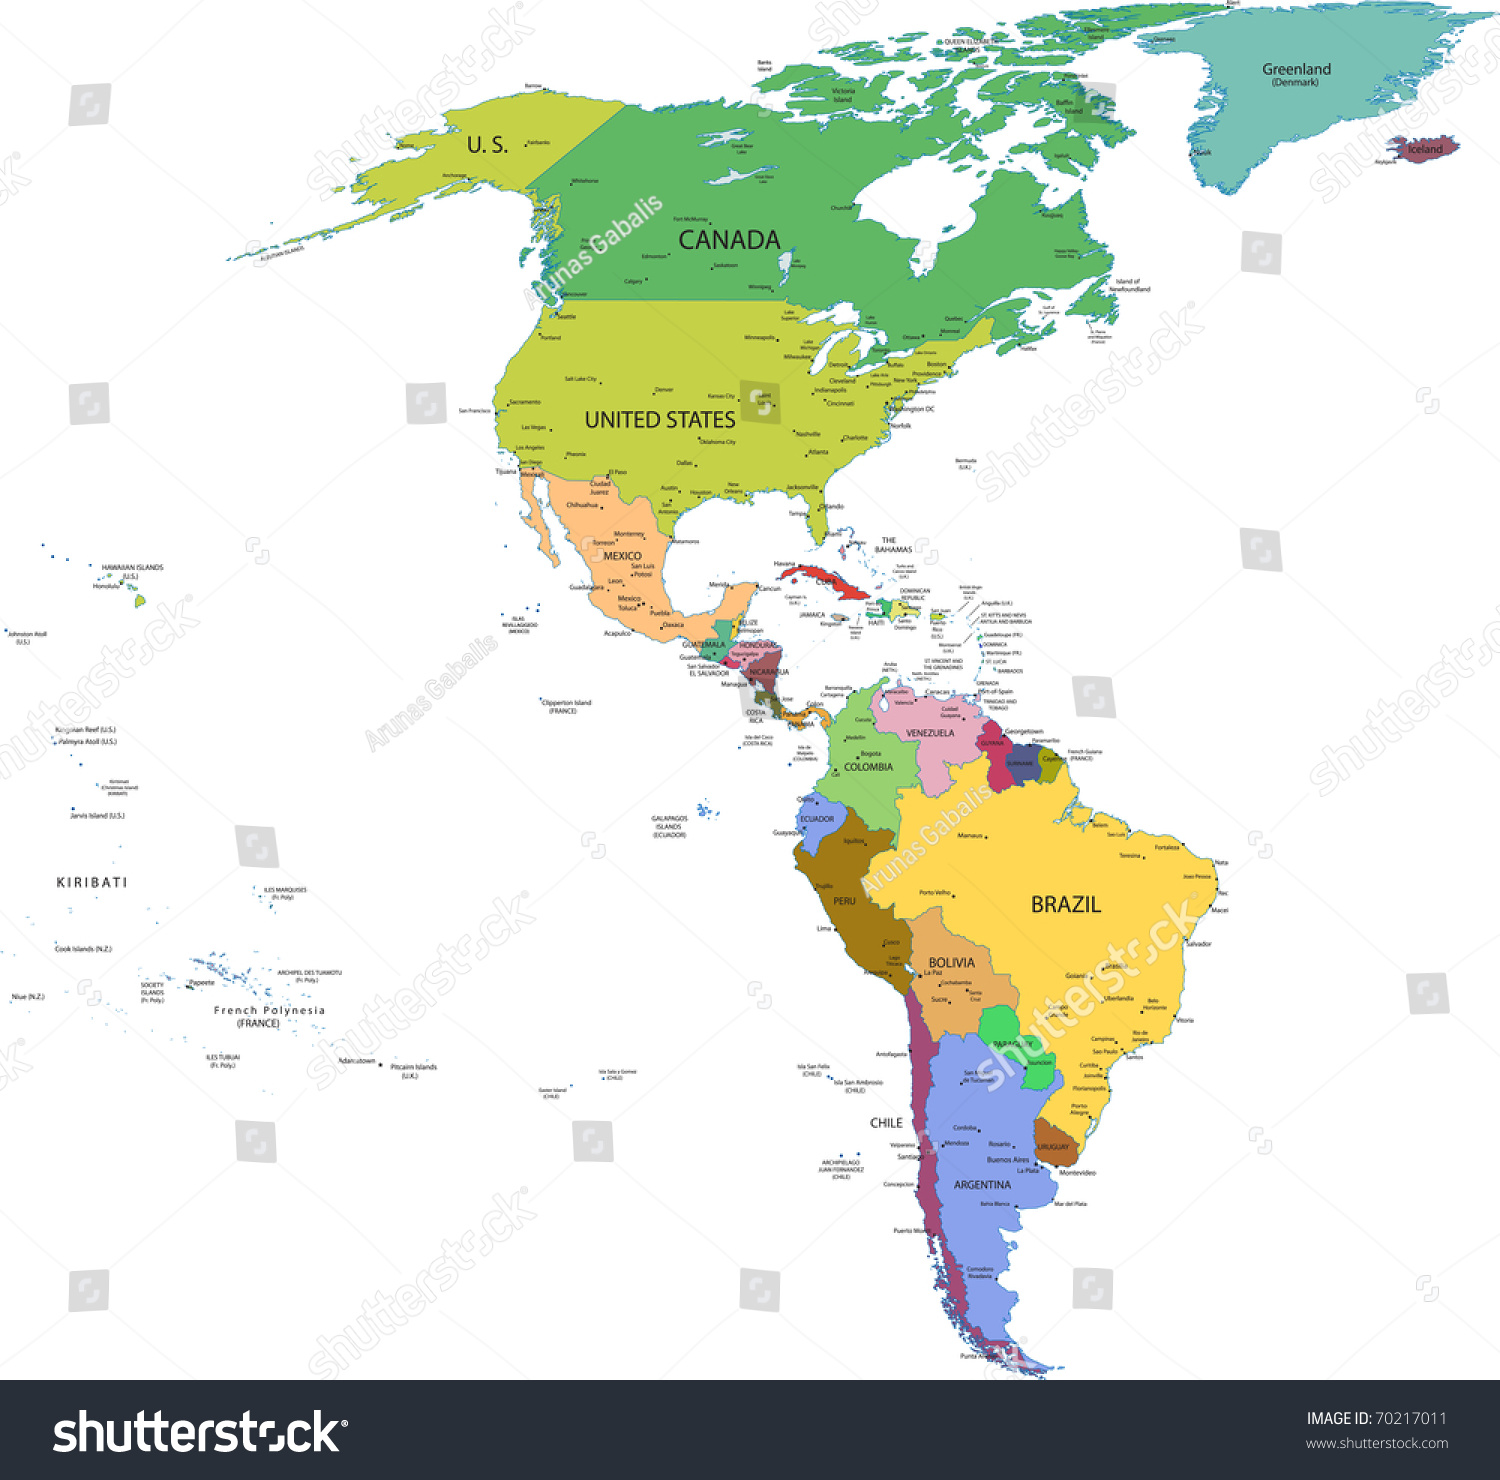 map of north america and south america with countries Map South North America Countries Capitals Stock Vector Royalty map of north america and south america with countries